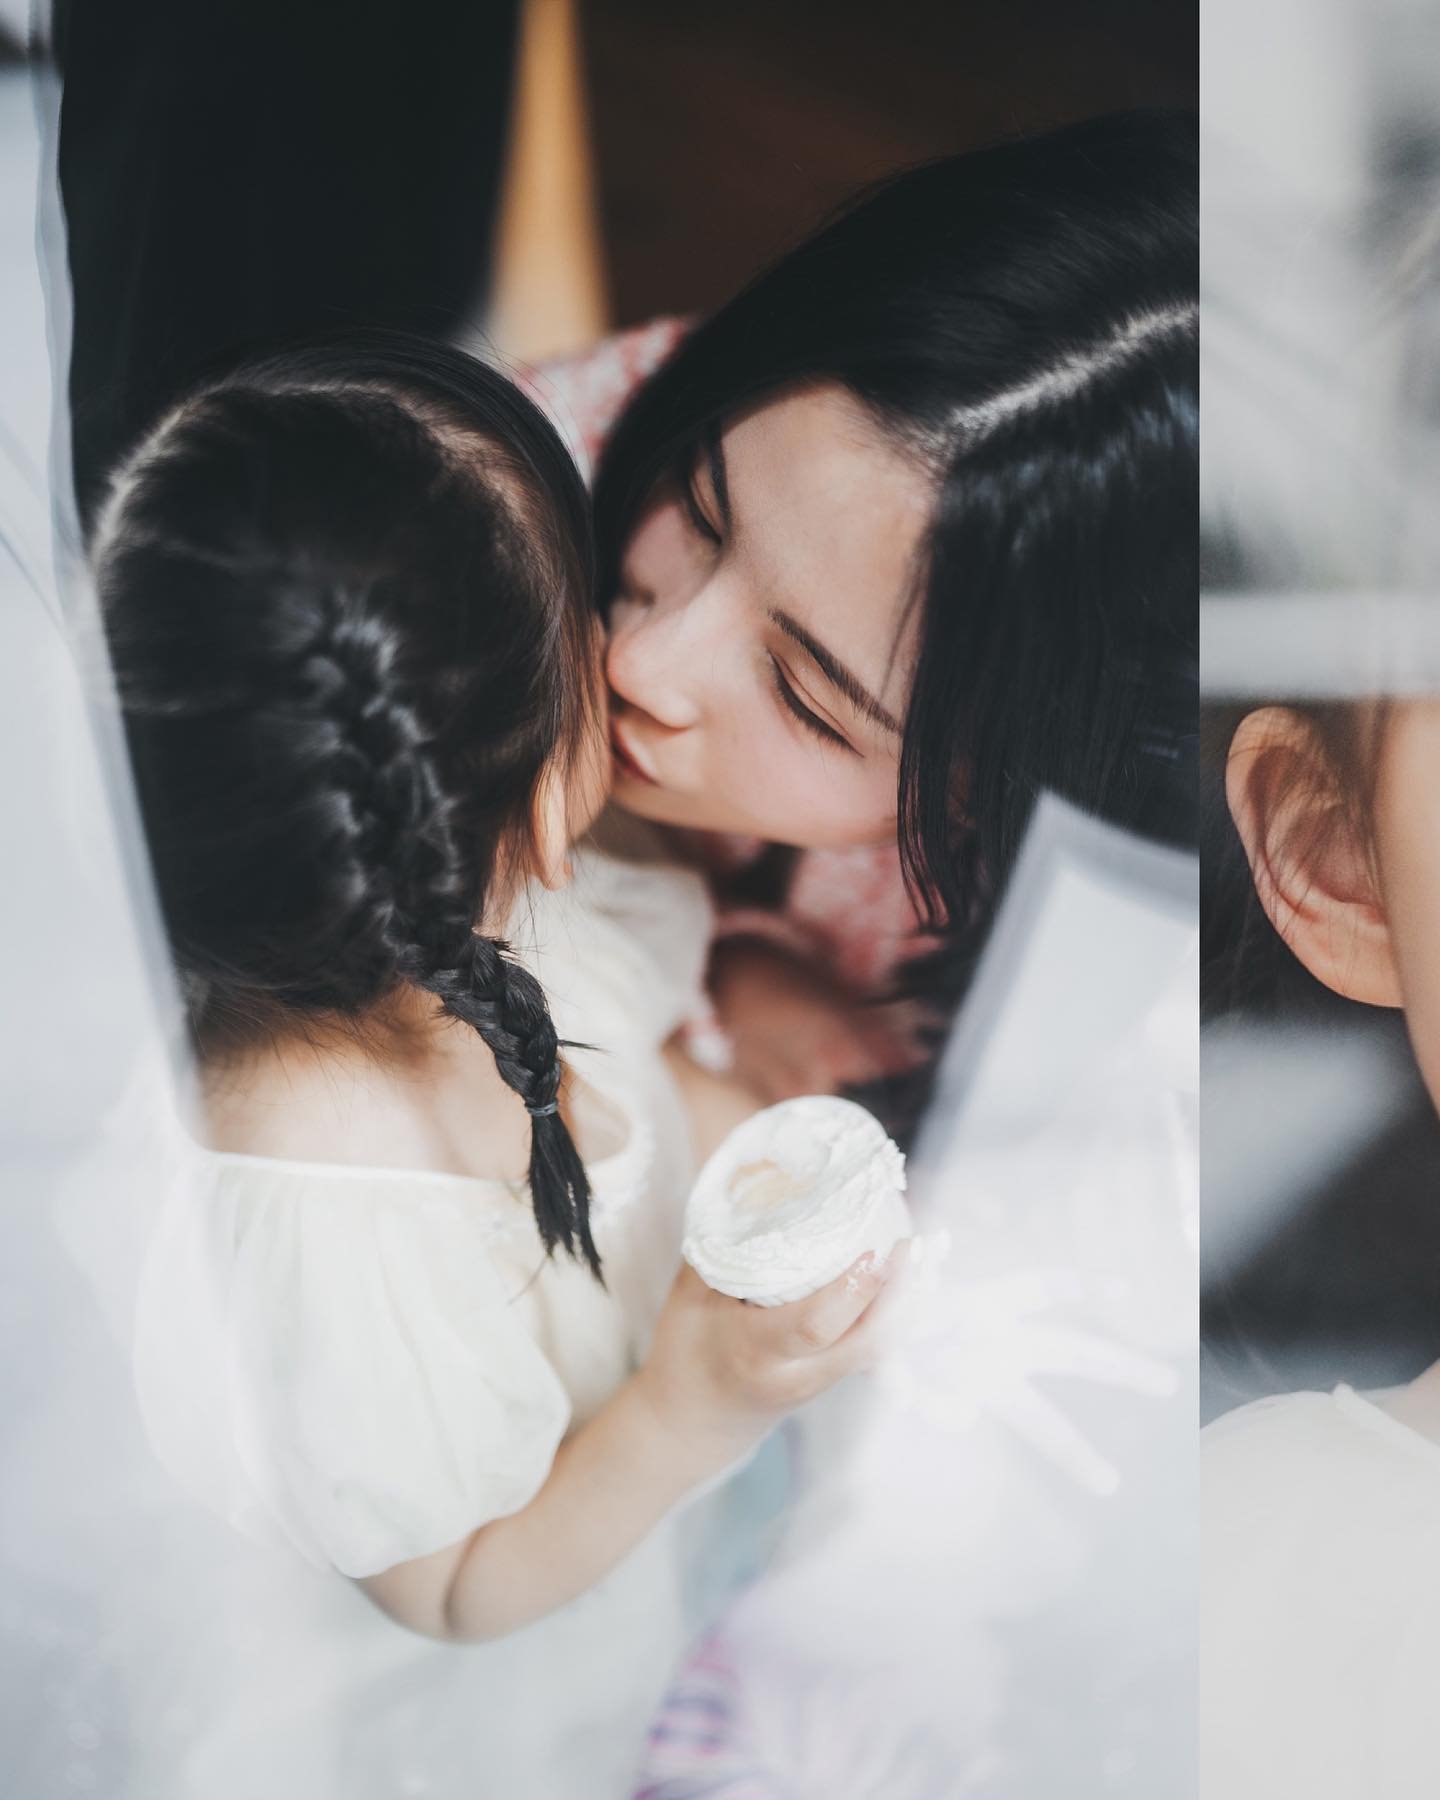 Capturing the sweetest moments of pure joy at this adorable 3rd birthday celebration! 📸✨ From playful giggles to tender embraces with Mom, every click was a treasure. 💖 #BirthdayBliss #CandidCaptures #MotherDaughterMagic